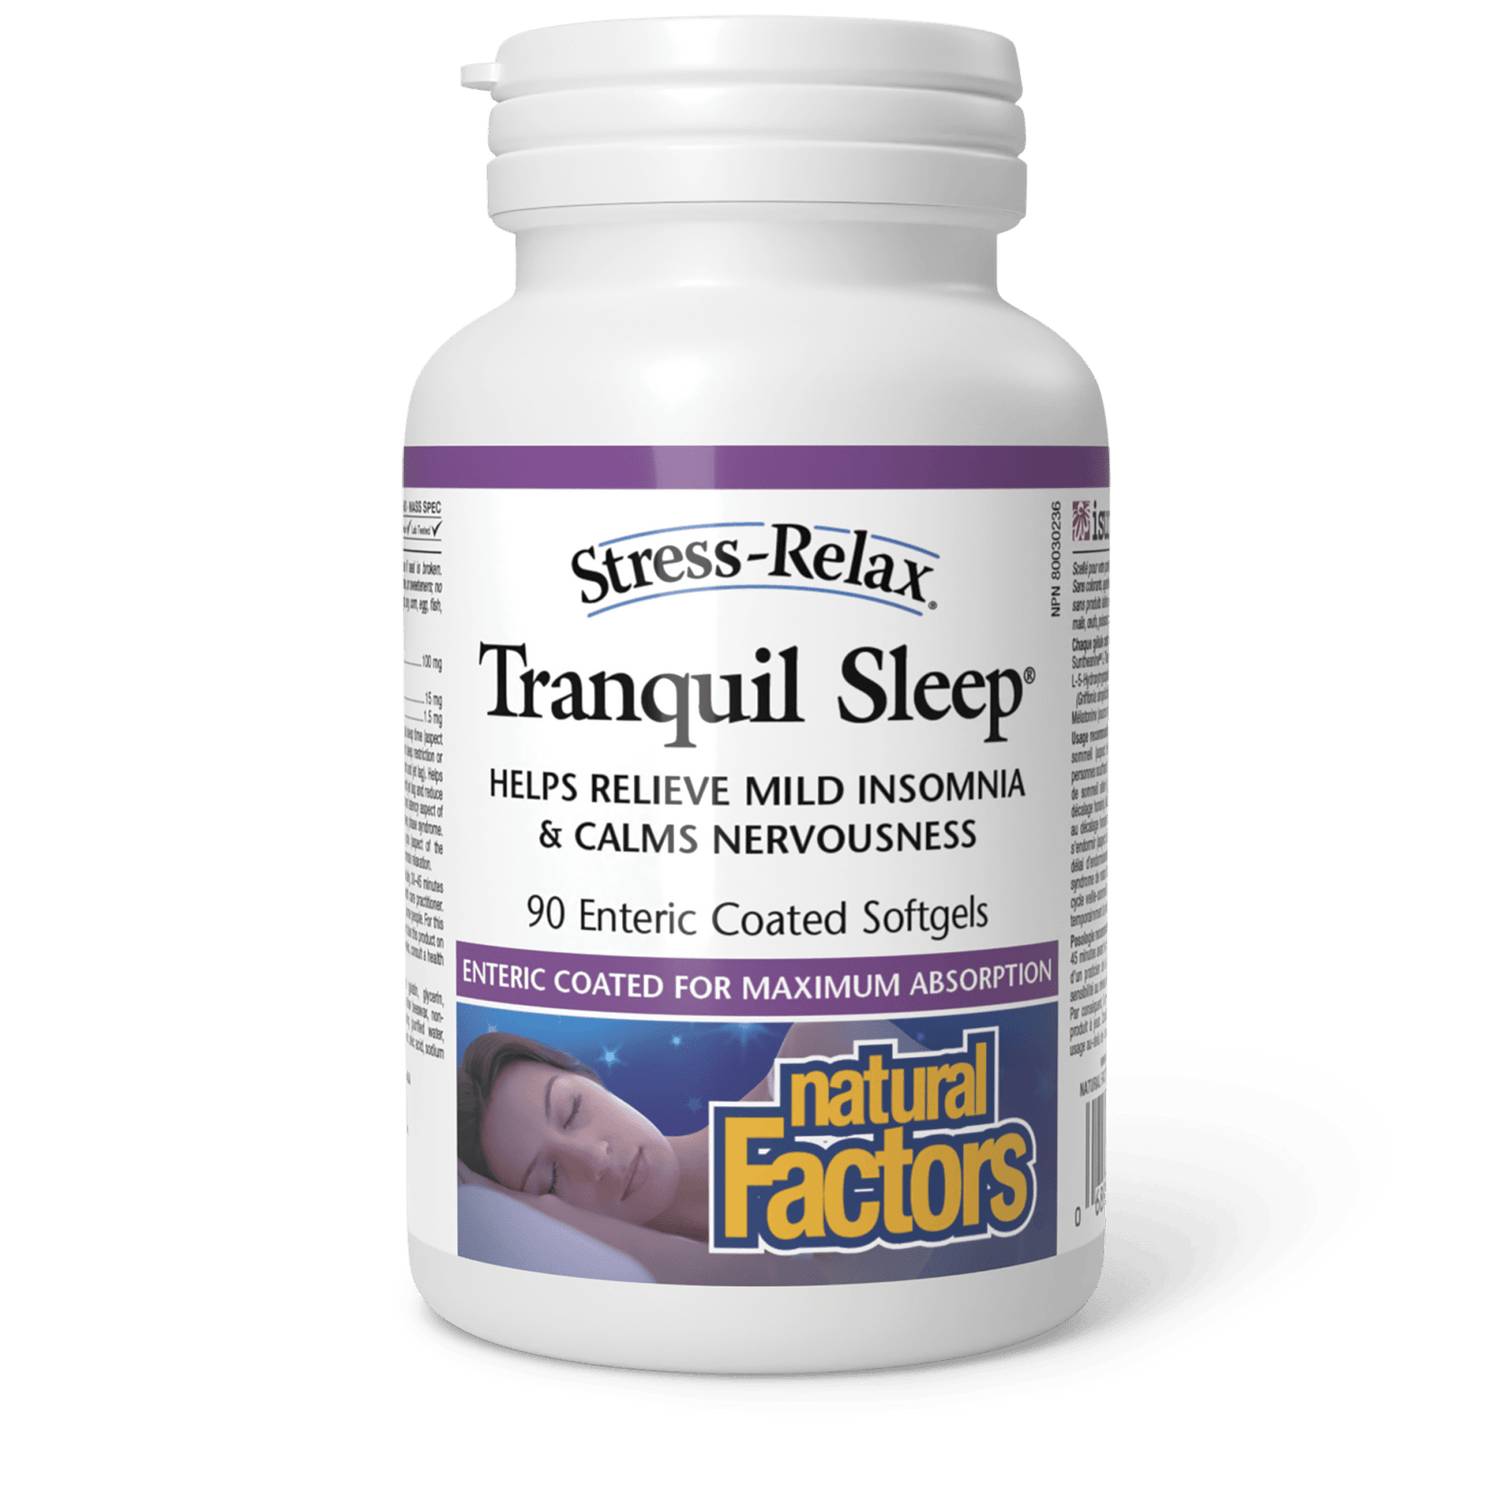 Tranquil Sleep, Stress-Relax, Natural Factors|v|image|2830